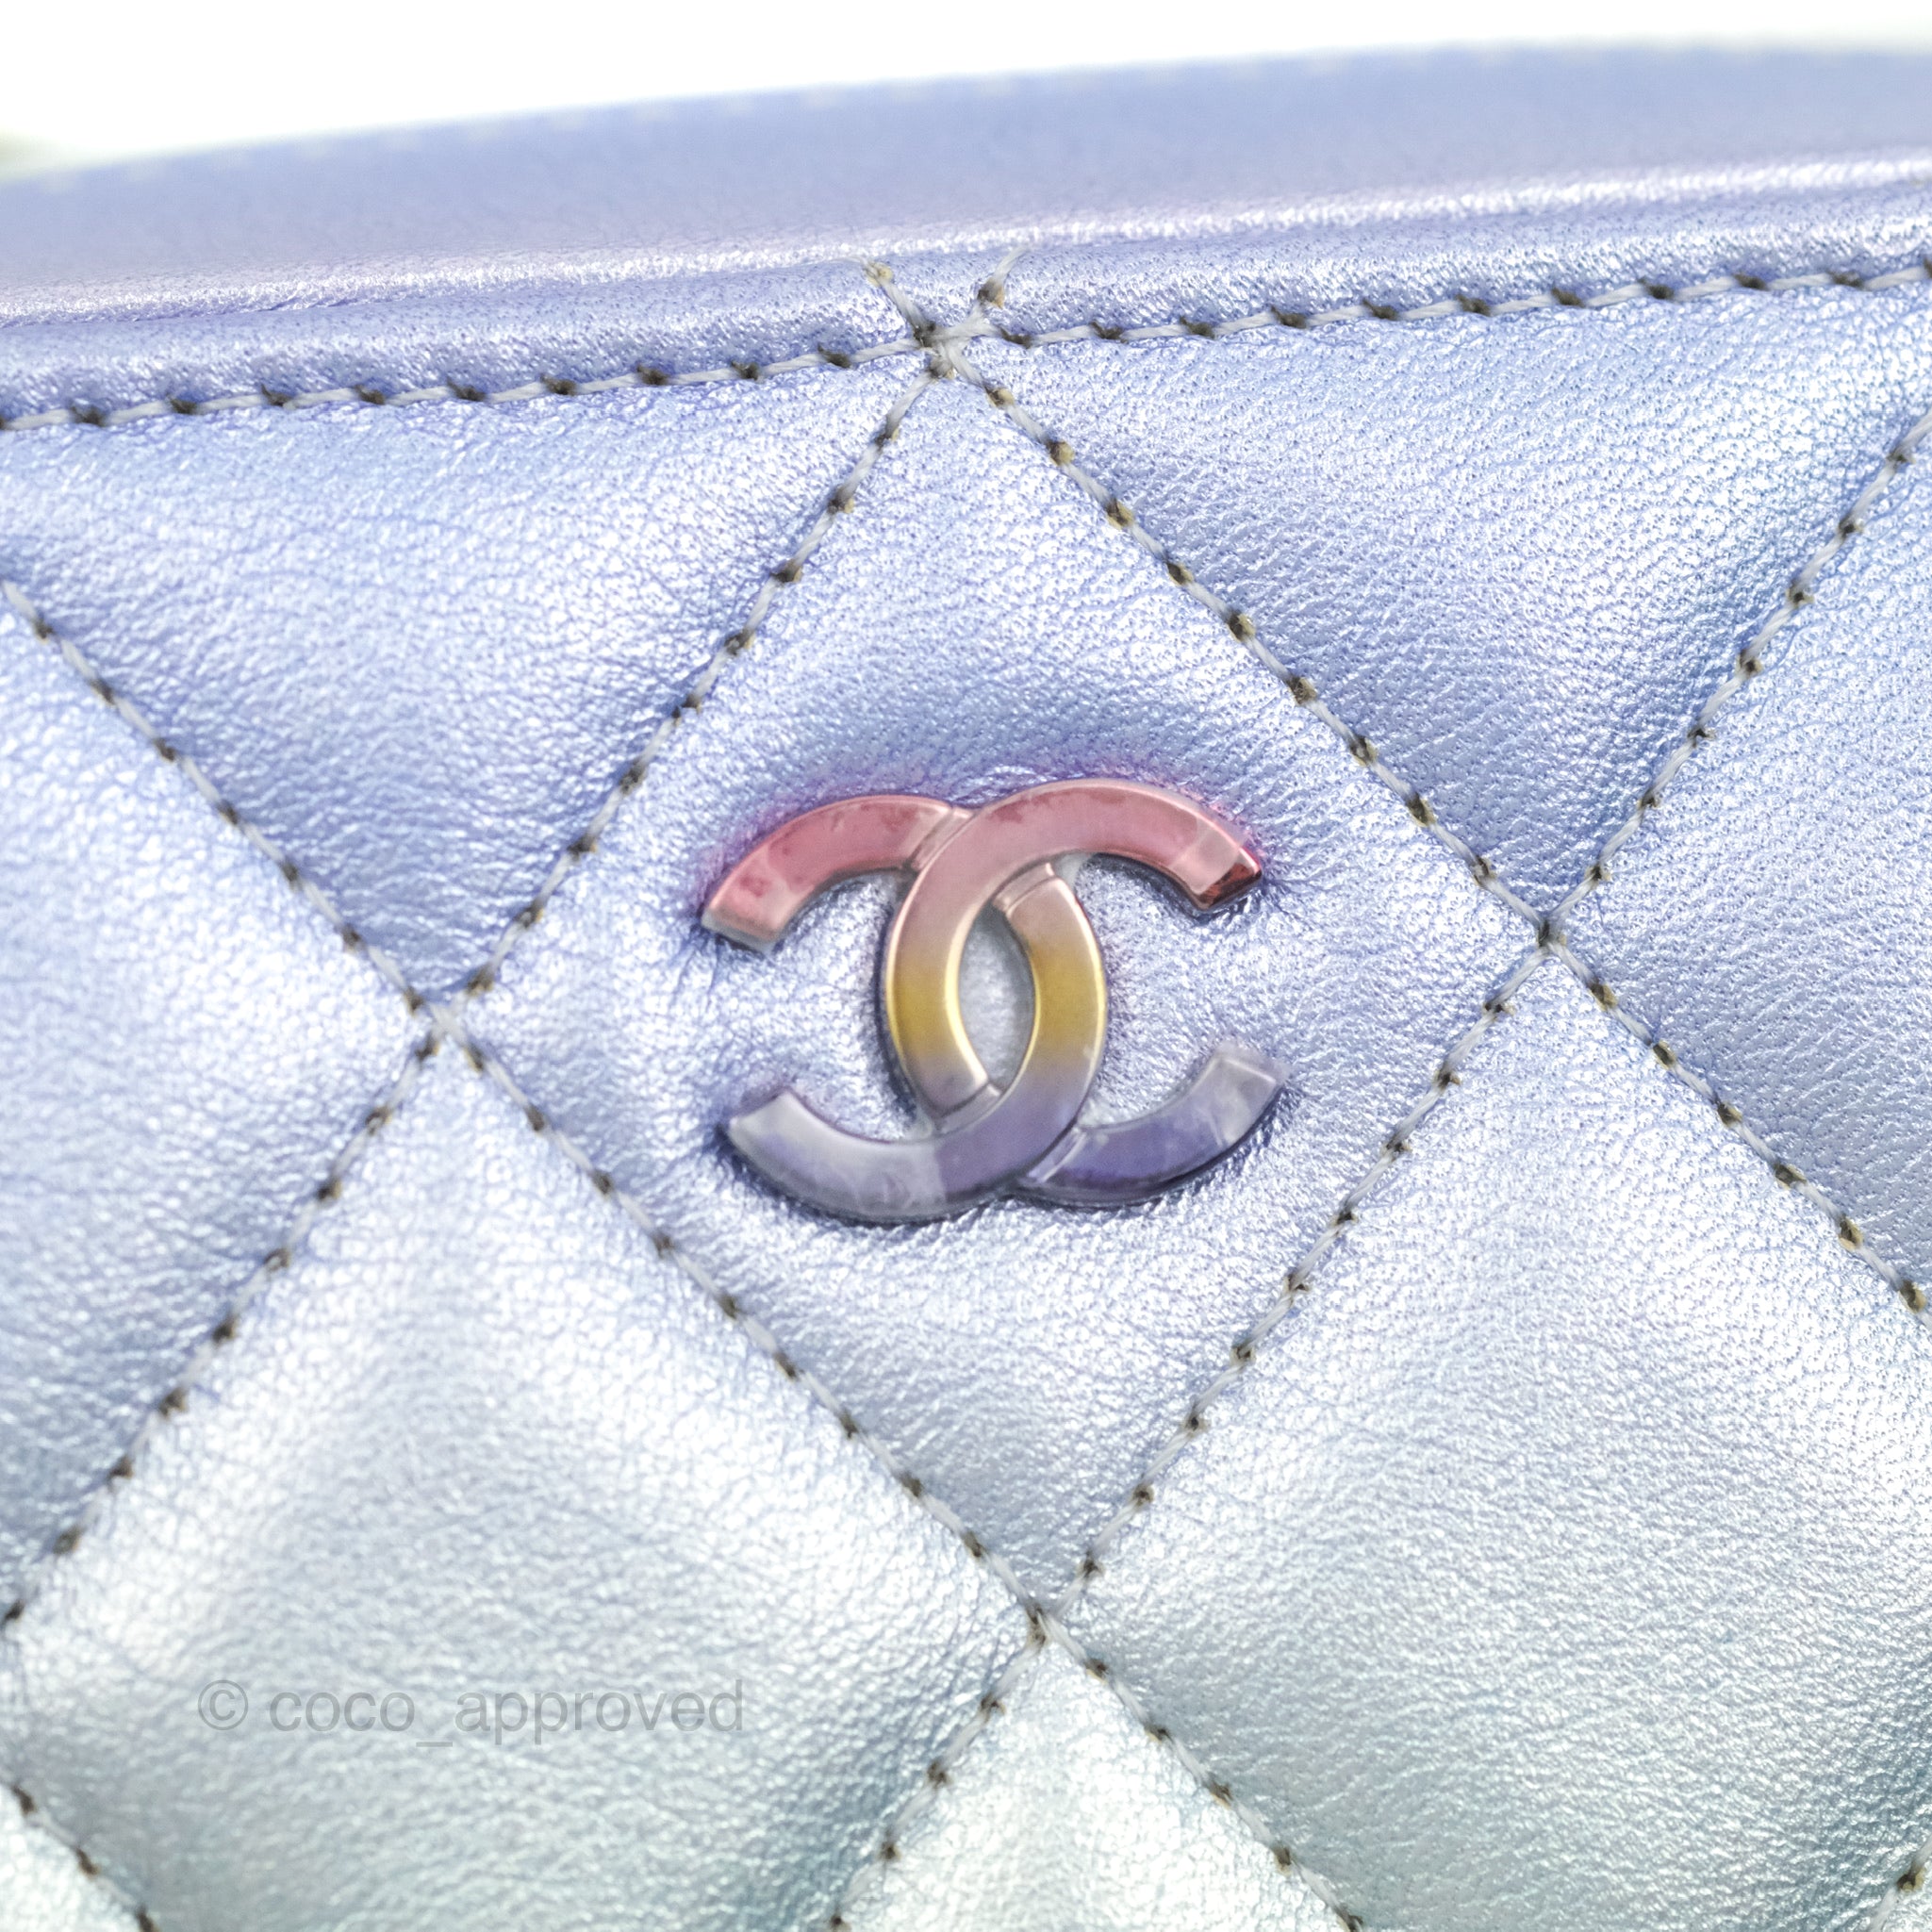 CHANEL Gradient Metallic Calfskin Quilted Wallet On Chain WOC Silver Blue  Yellow Purple 875546